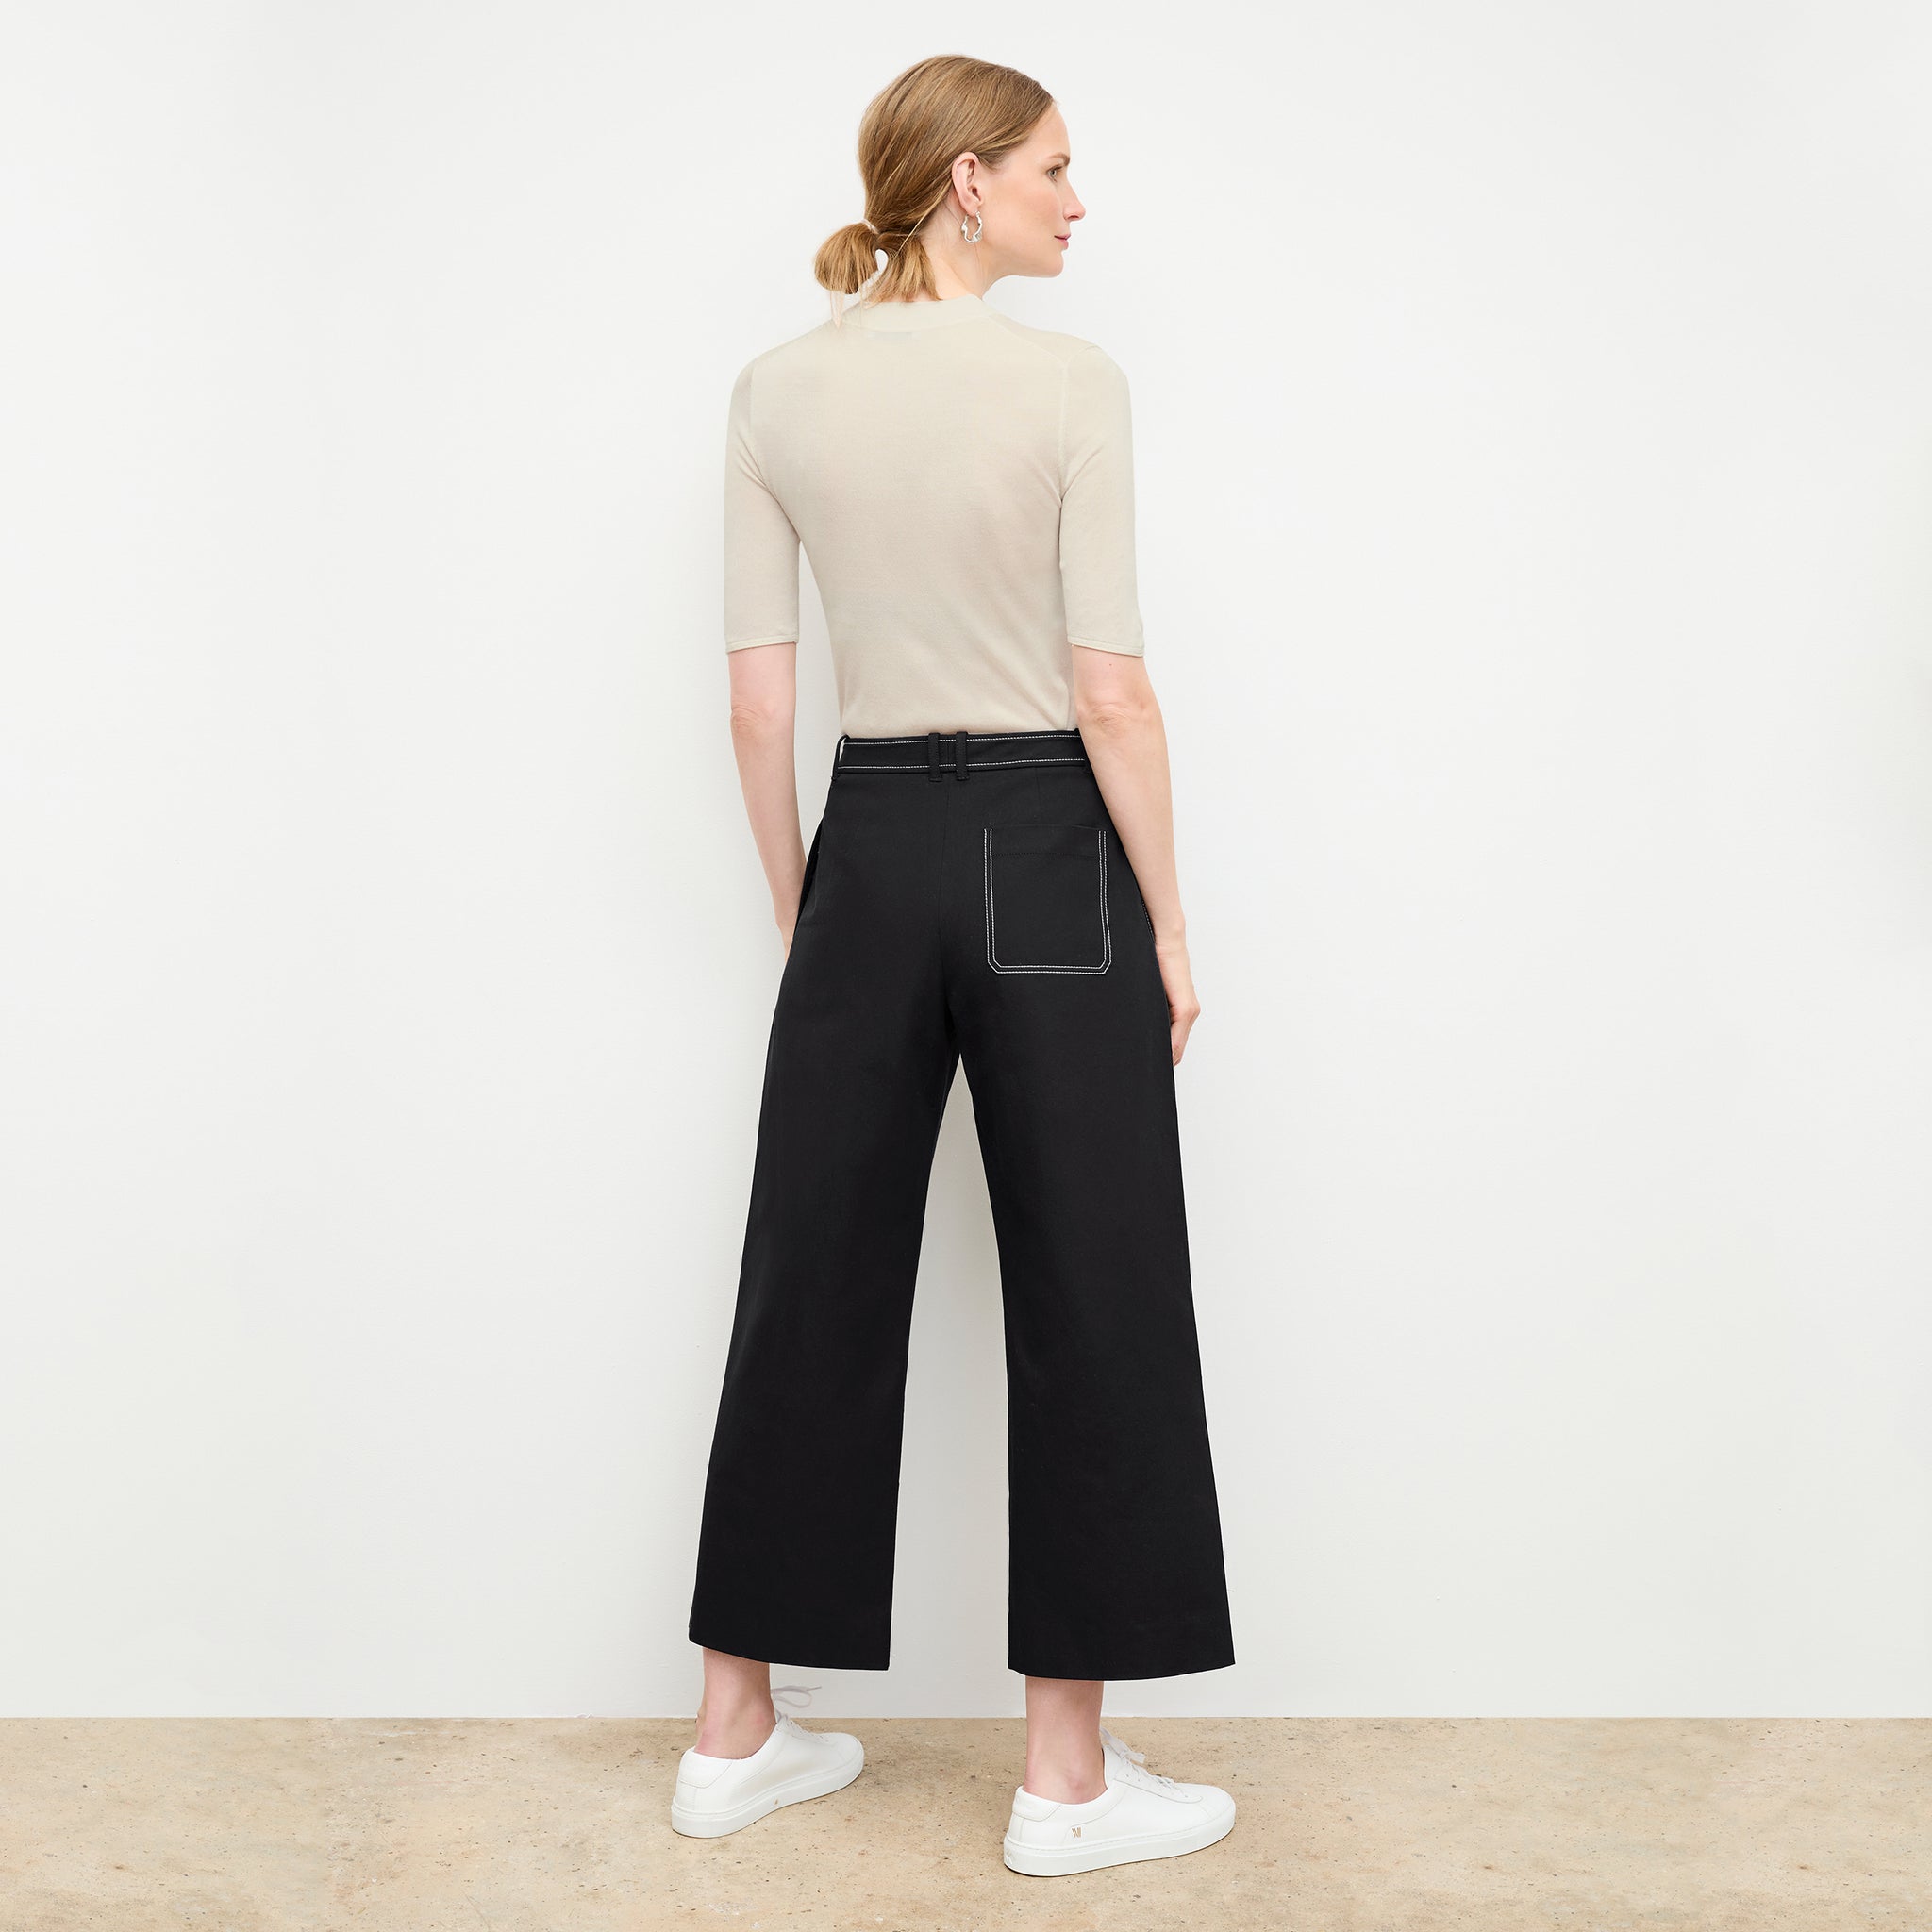 back image of a woman wearing the abby pant in black